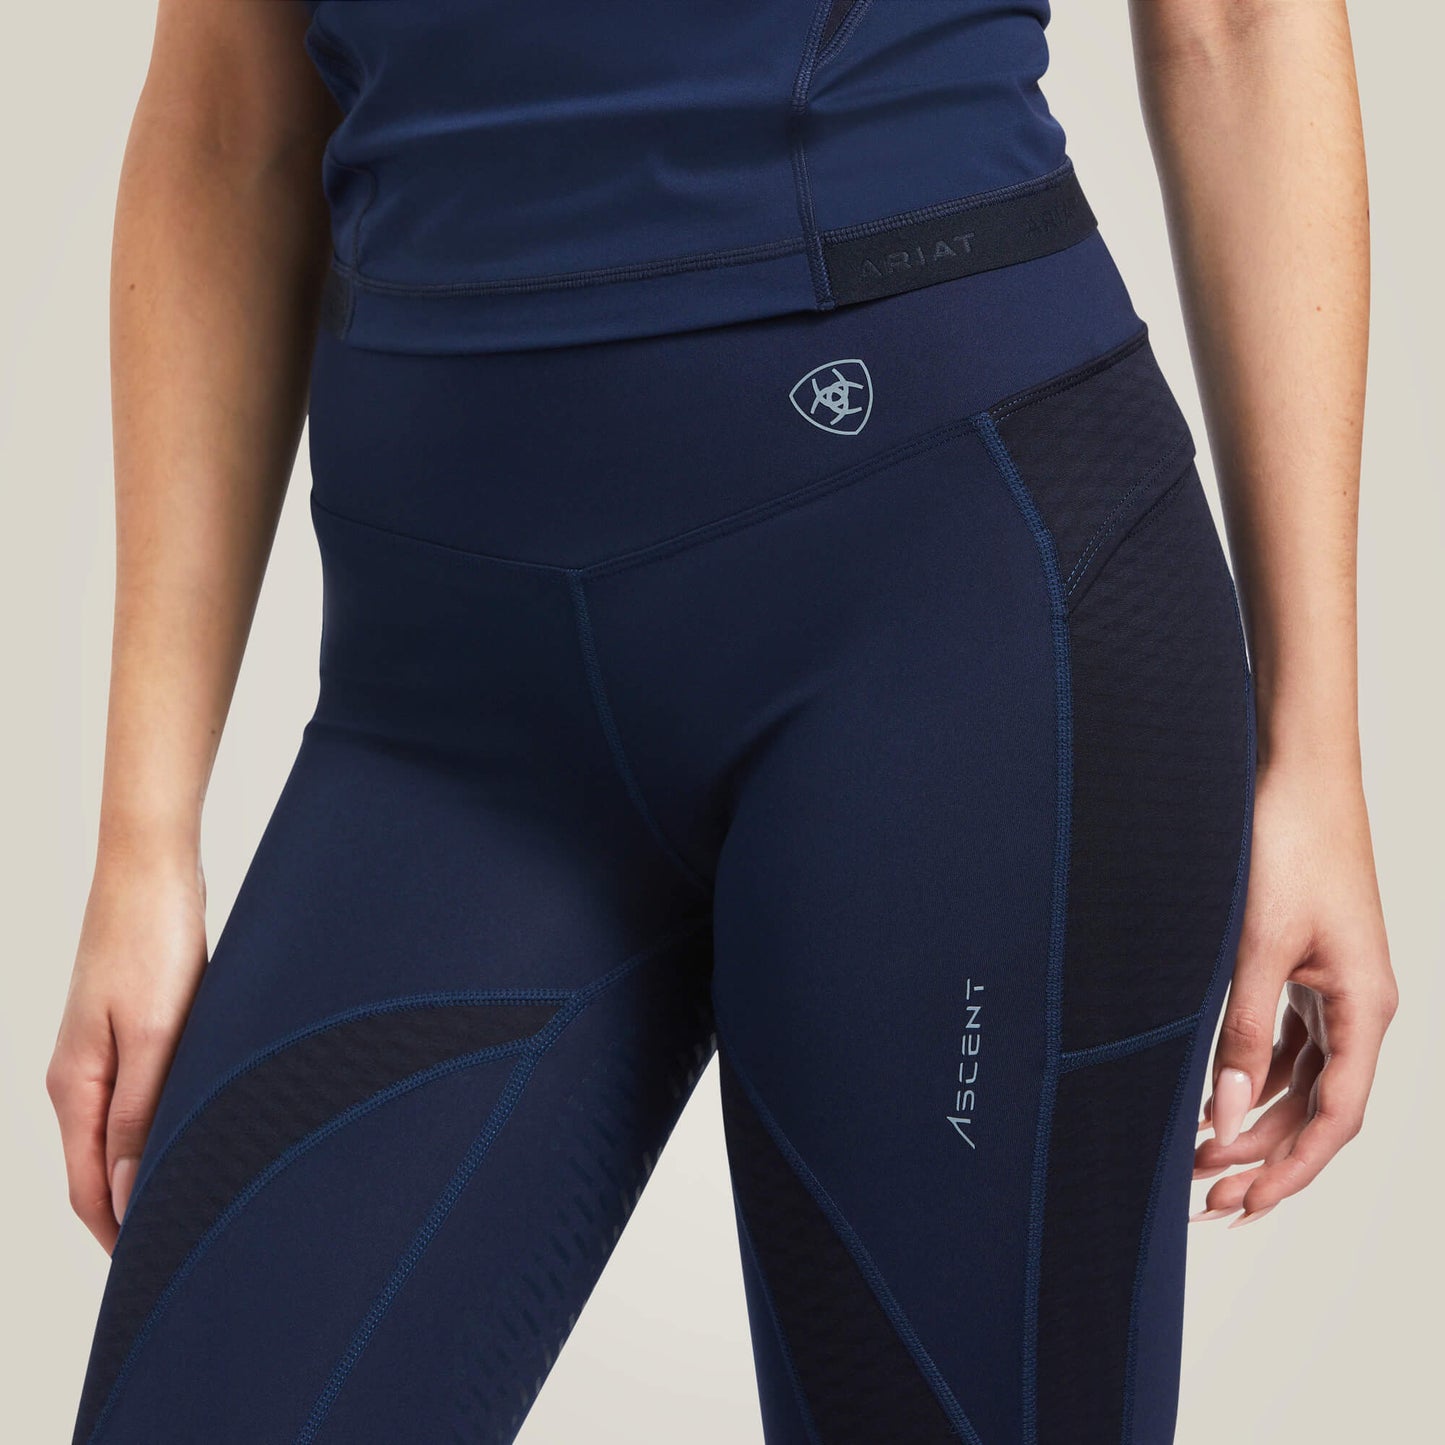 Ascent Half Grip Tights || Navy Size XS ONLY